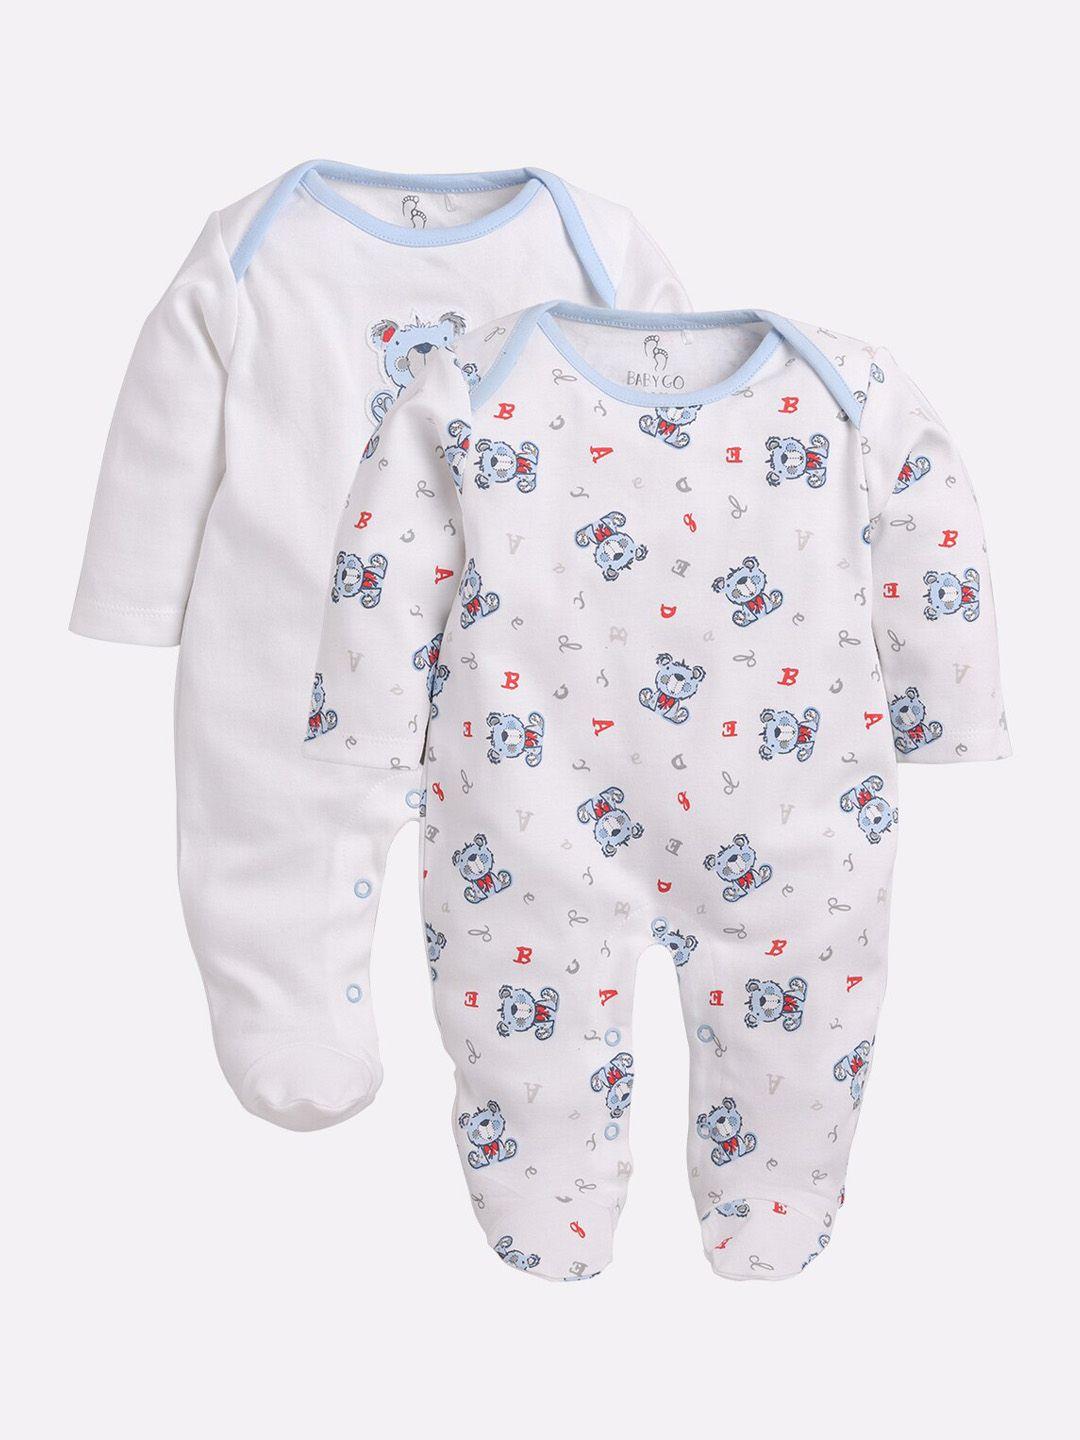 BABY GO Infant Girls Pack Of 2 White & Blue Organic Cotton Printed Rompers